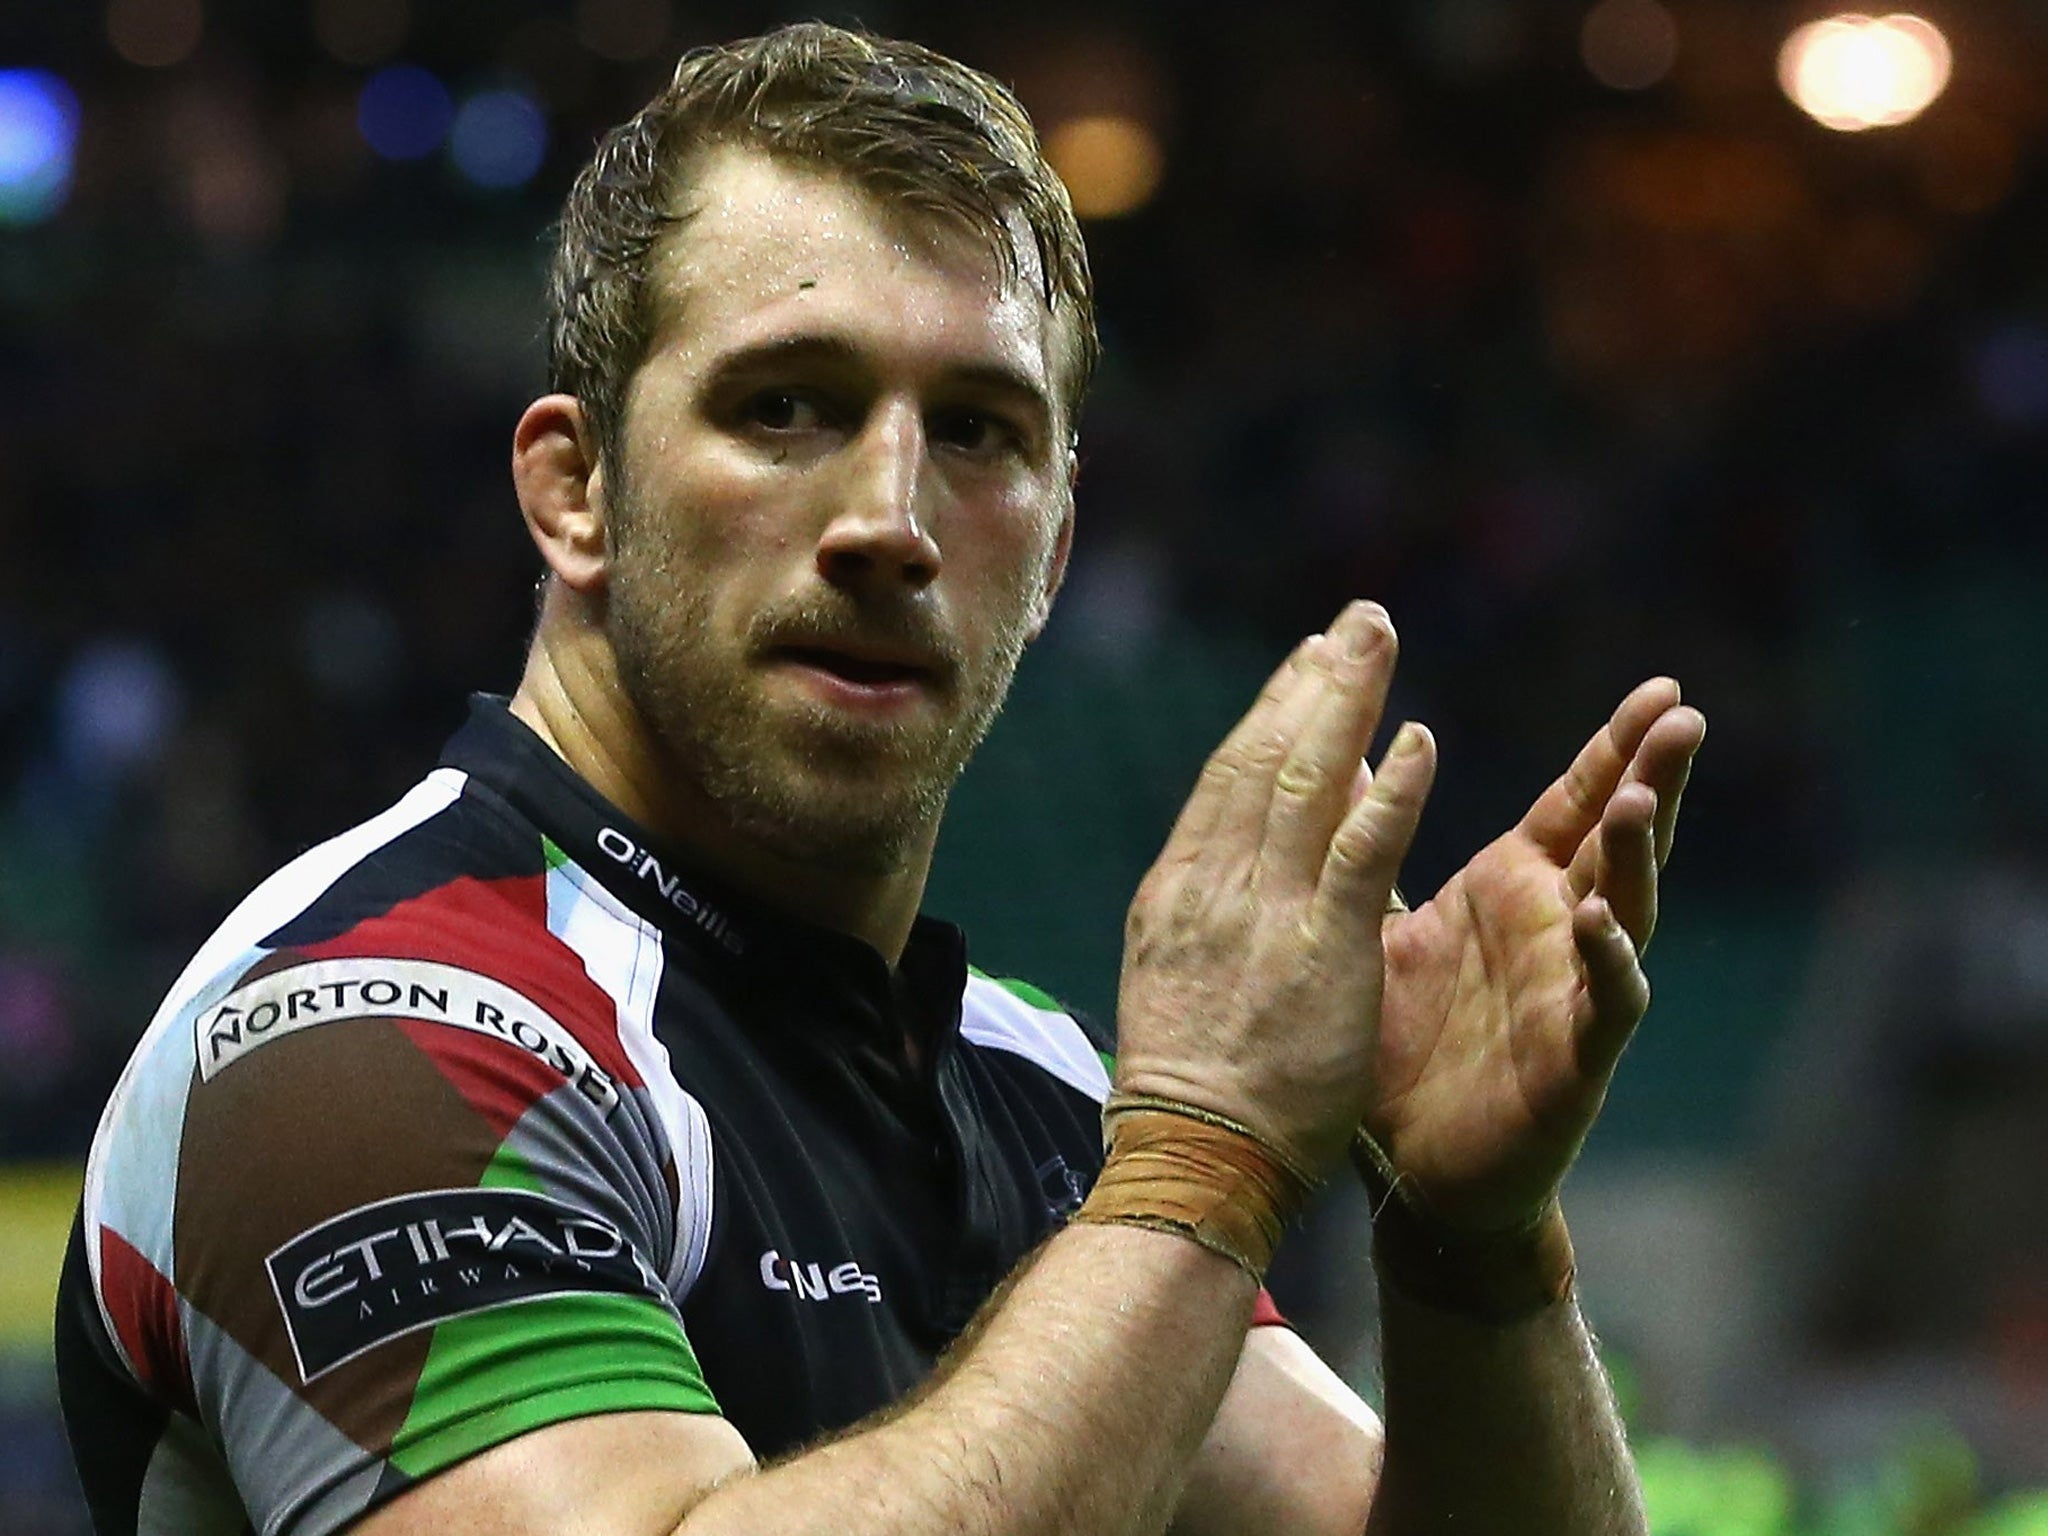 Chris Robshaw is eager to build on club’s success with victories in both Europe and the Premiership